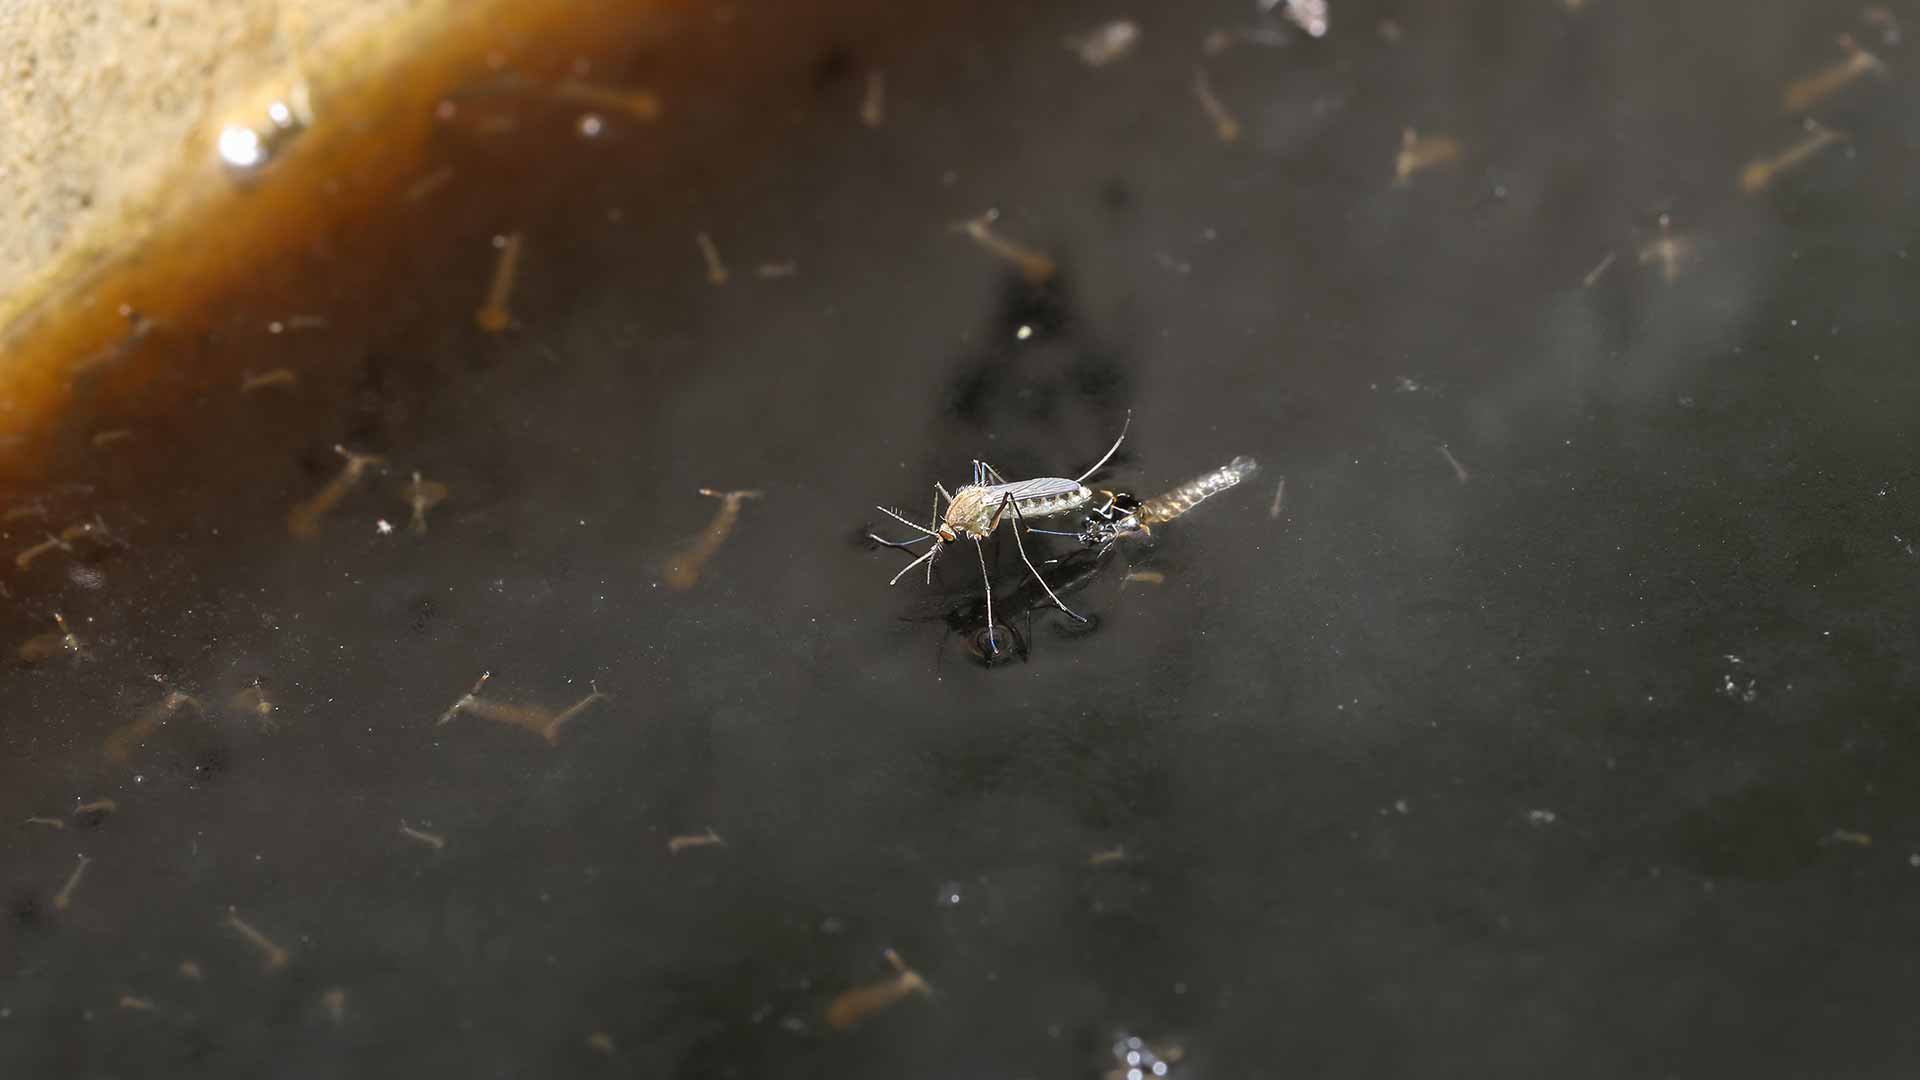 A mosquito in stagnant water near Macomb, MI.